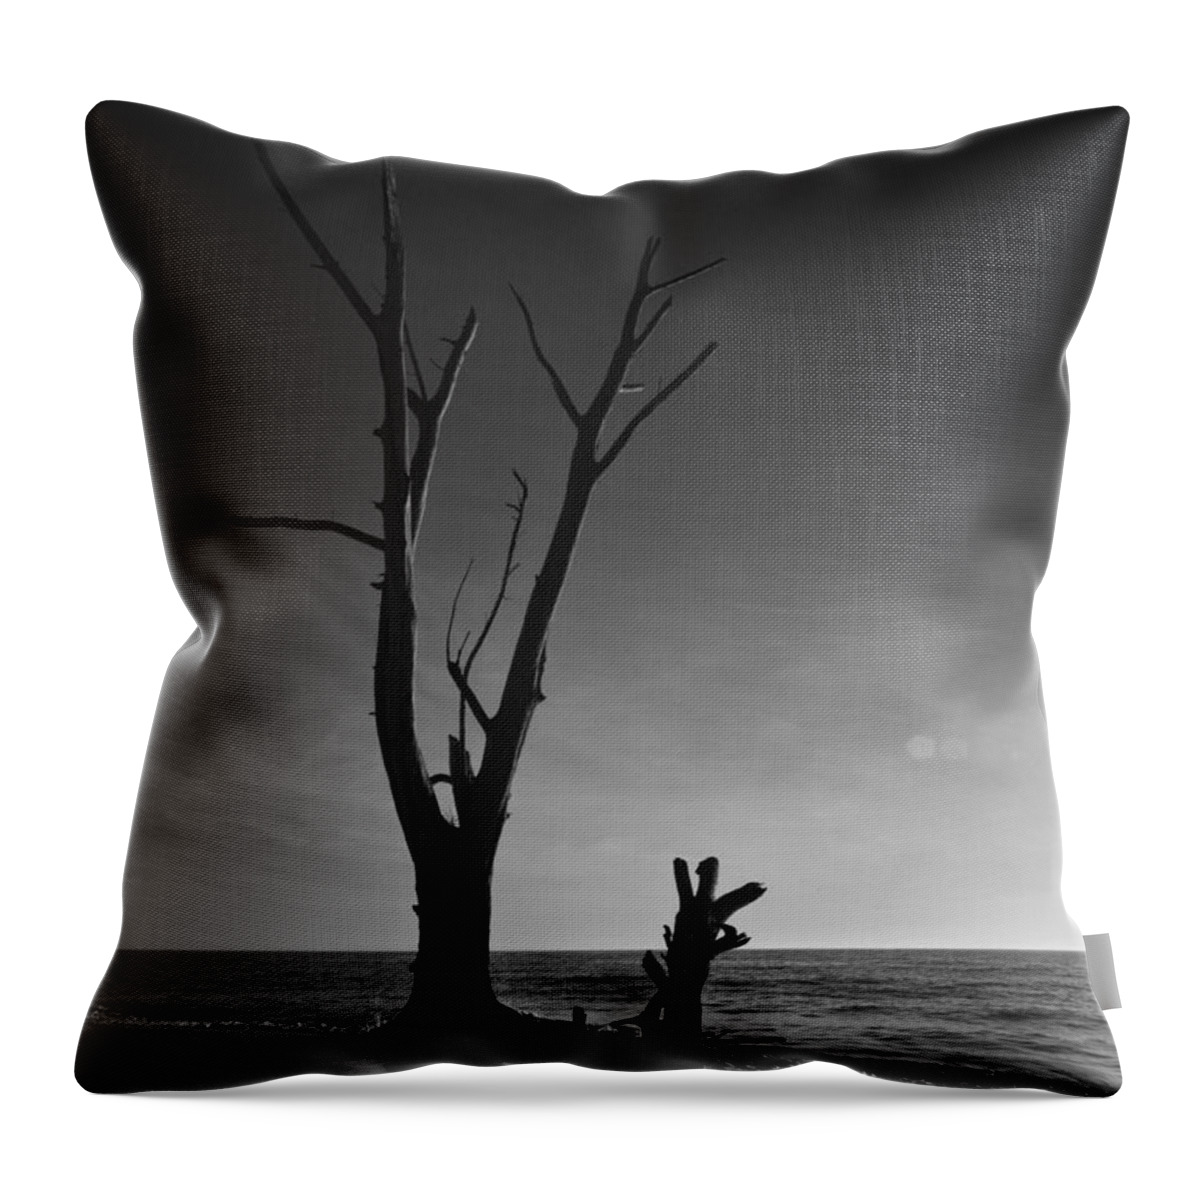 Florida Throw Pillow featuring the photograph Deserted Beach Sunset by Bradley R Youngberg